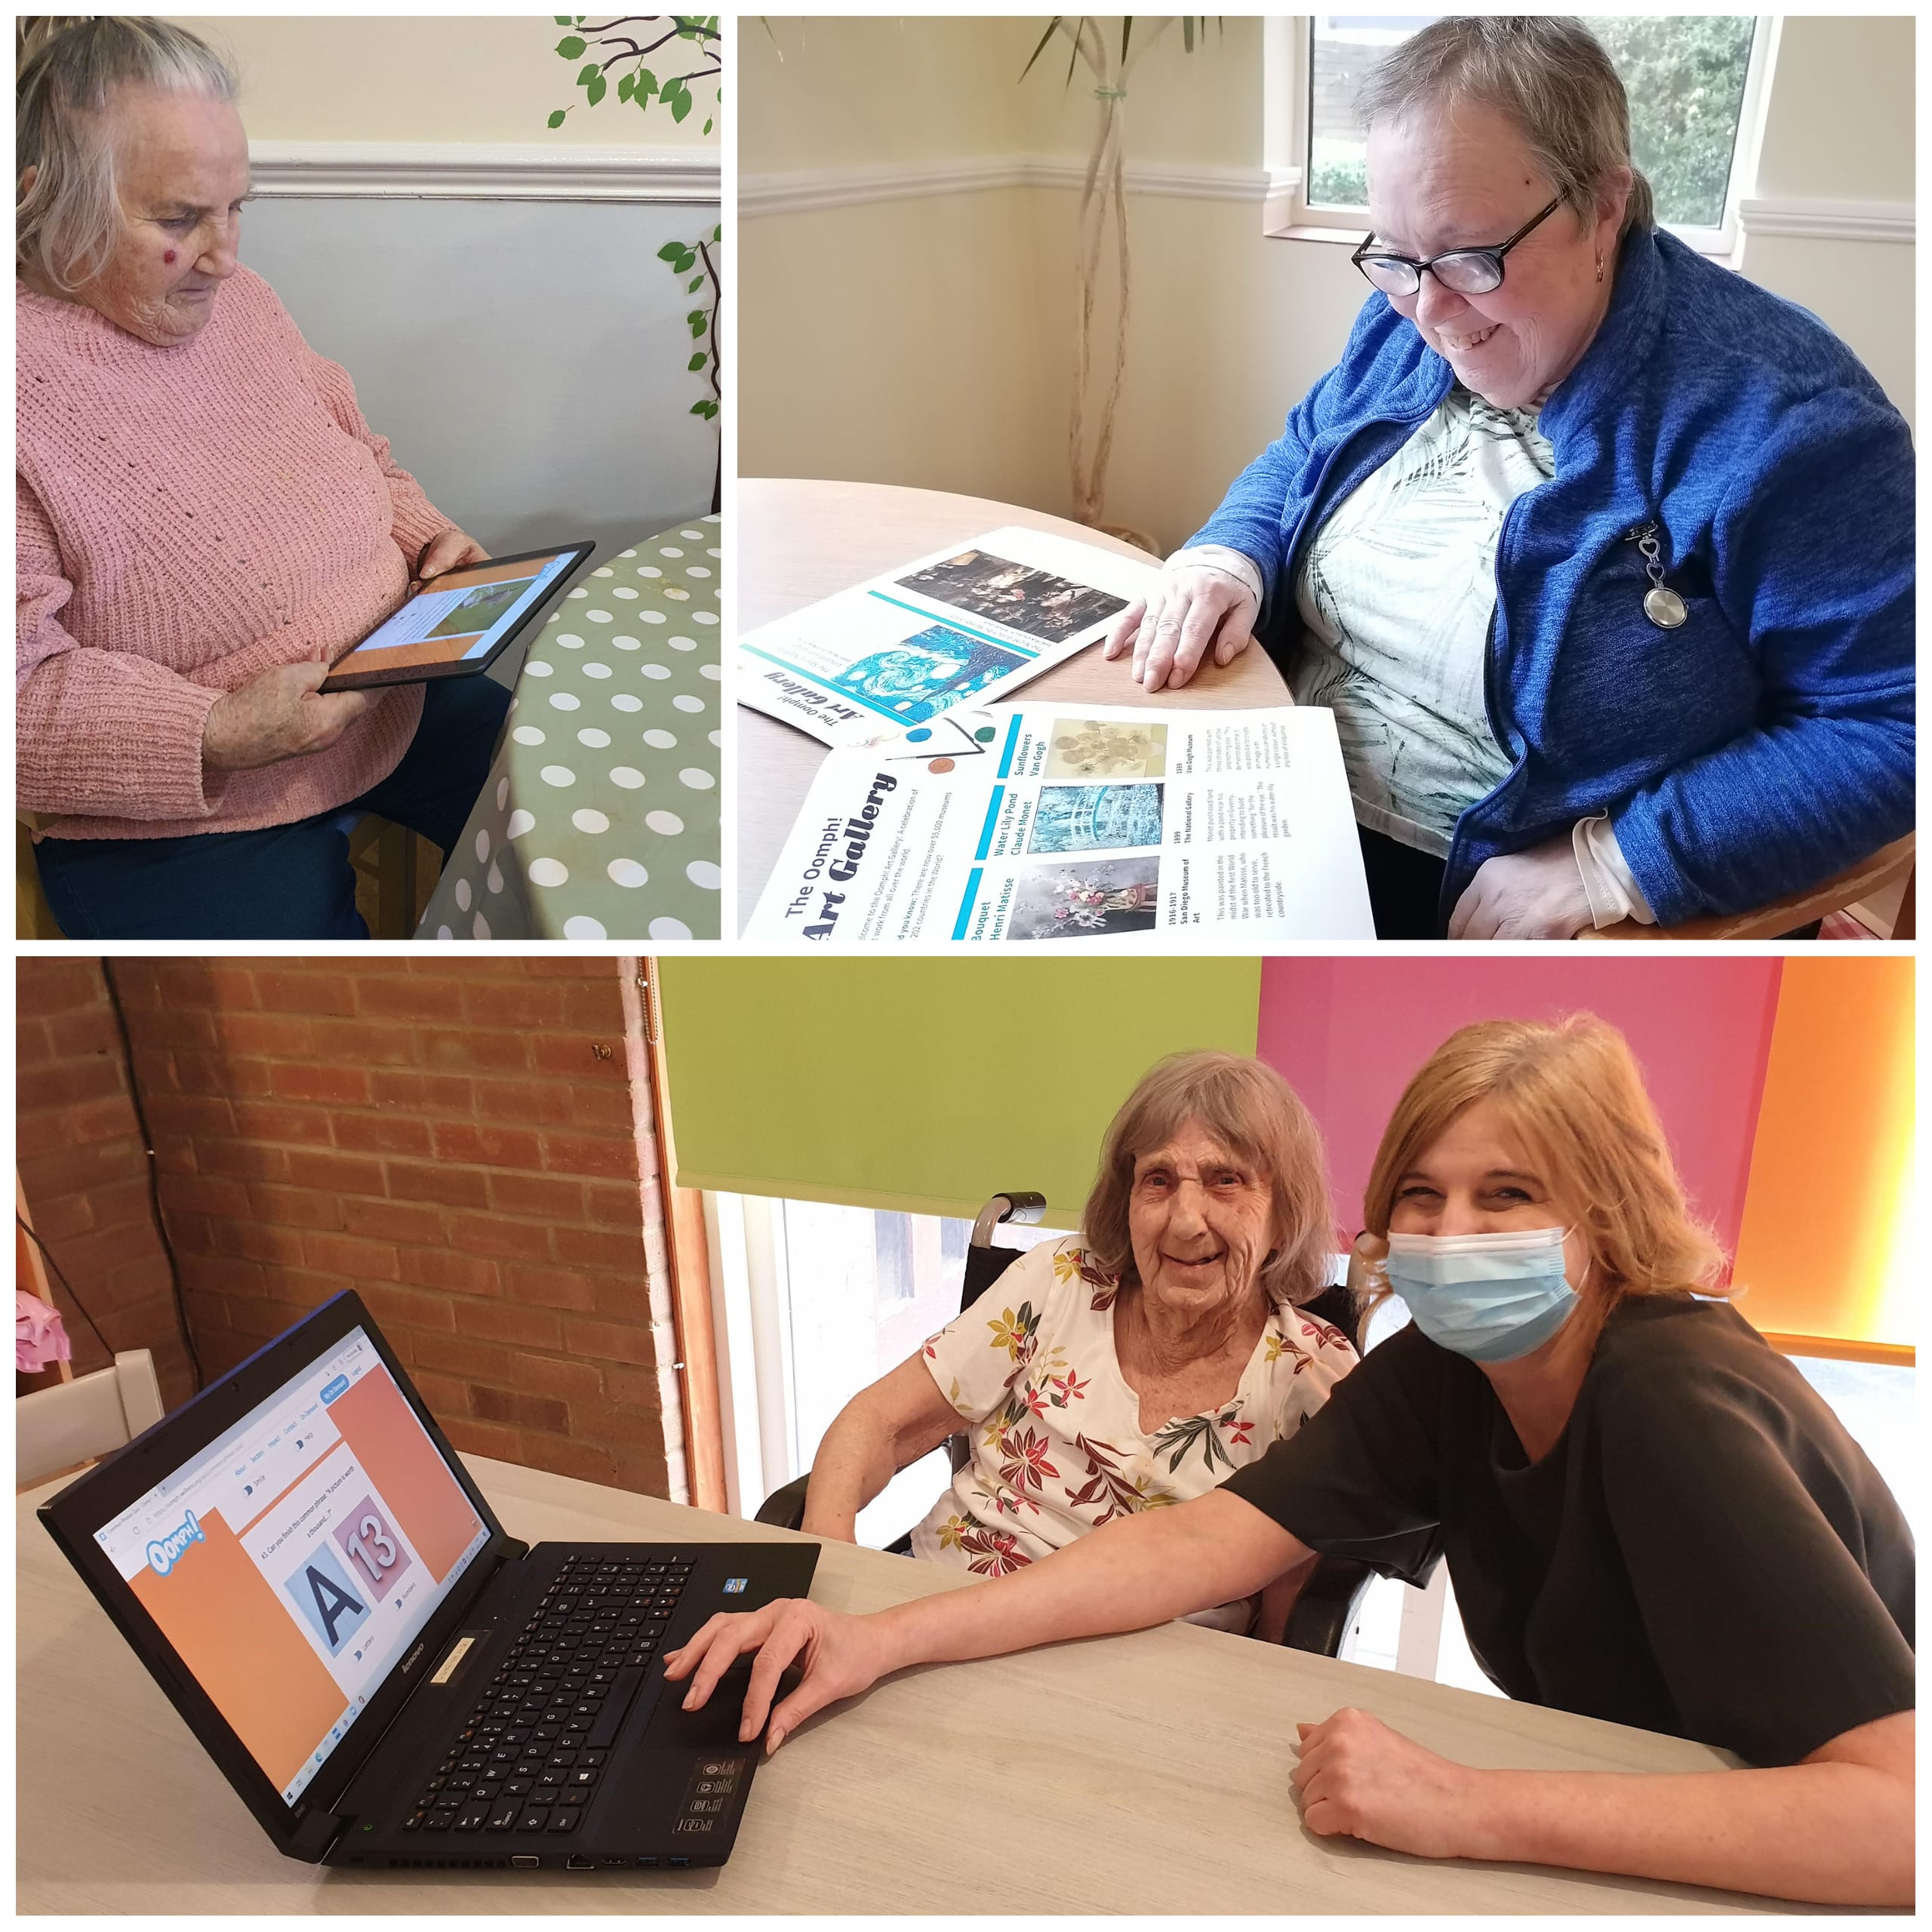 Residents at Larchwood Care Homes enjoying digital activities and resources from the Oomph On Demand wellbeing platform.